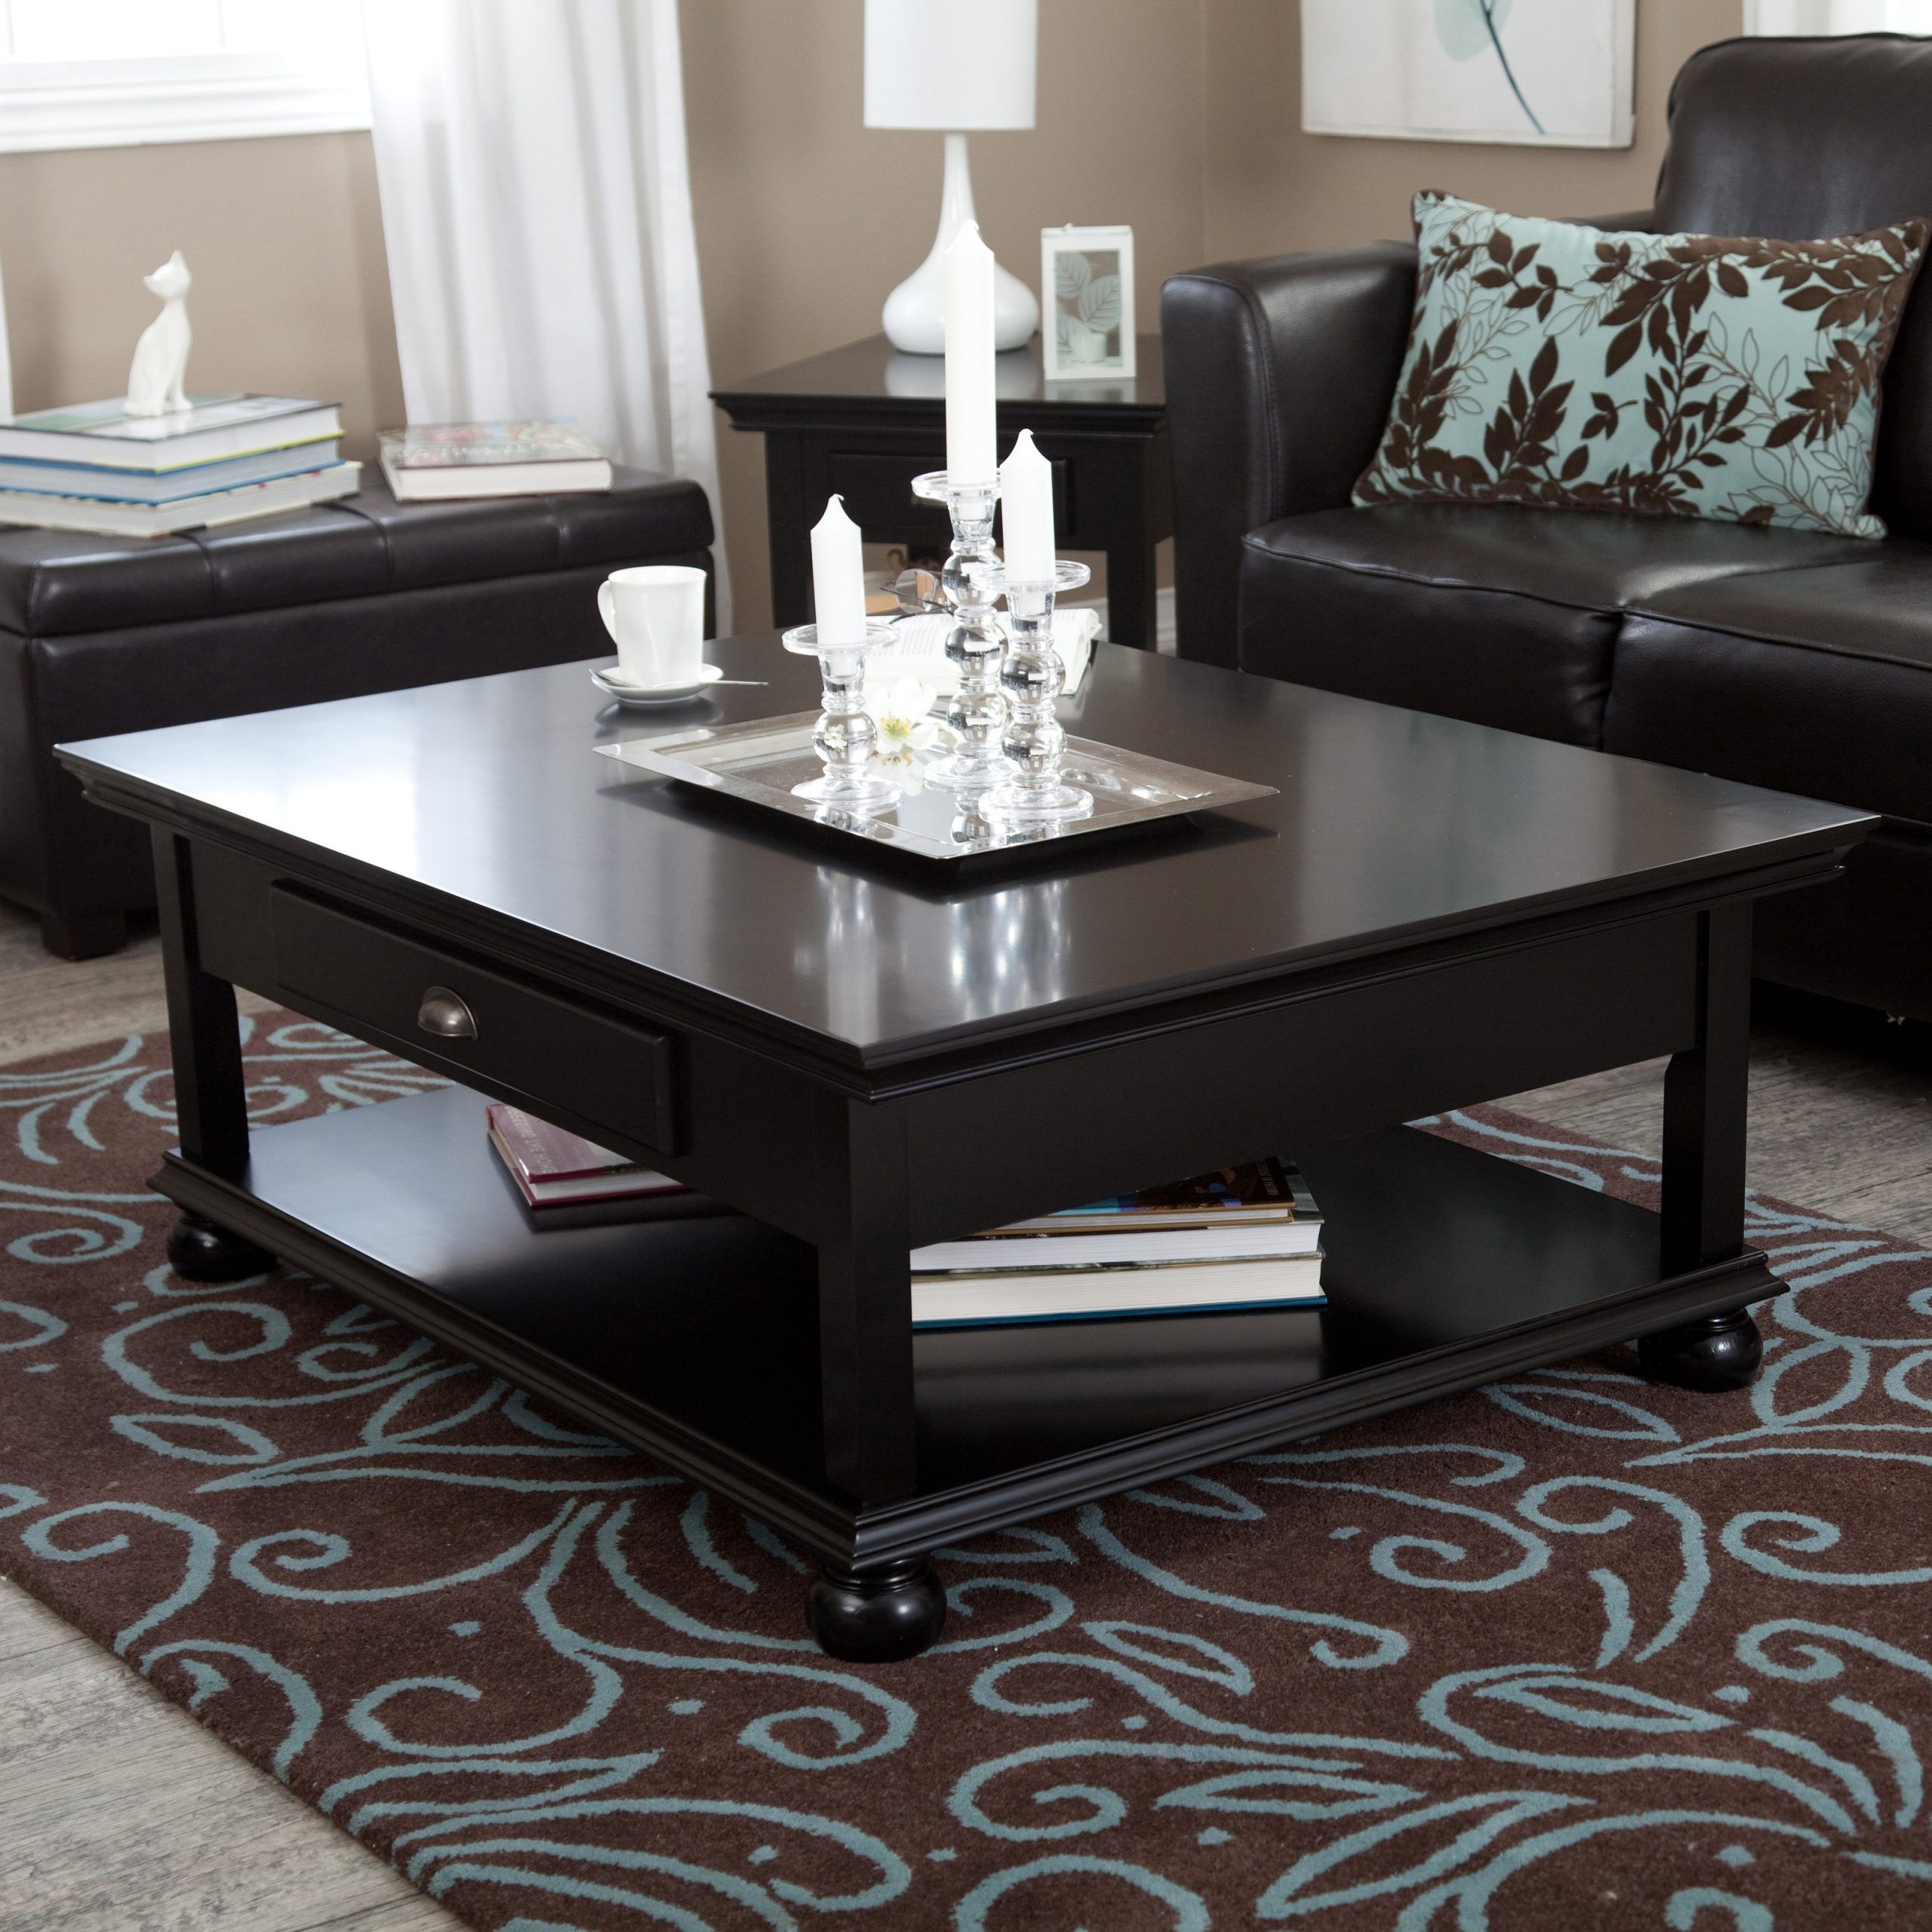 Parker Coffee Table – Black At Hayneedle Regarding Widely Used Aged Black Coffee Tables (View 1 of 20)